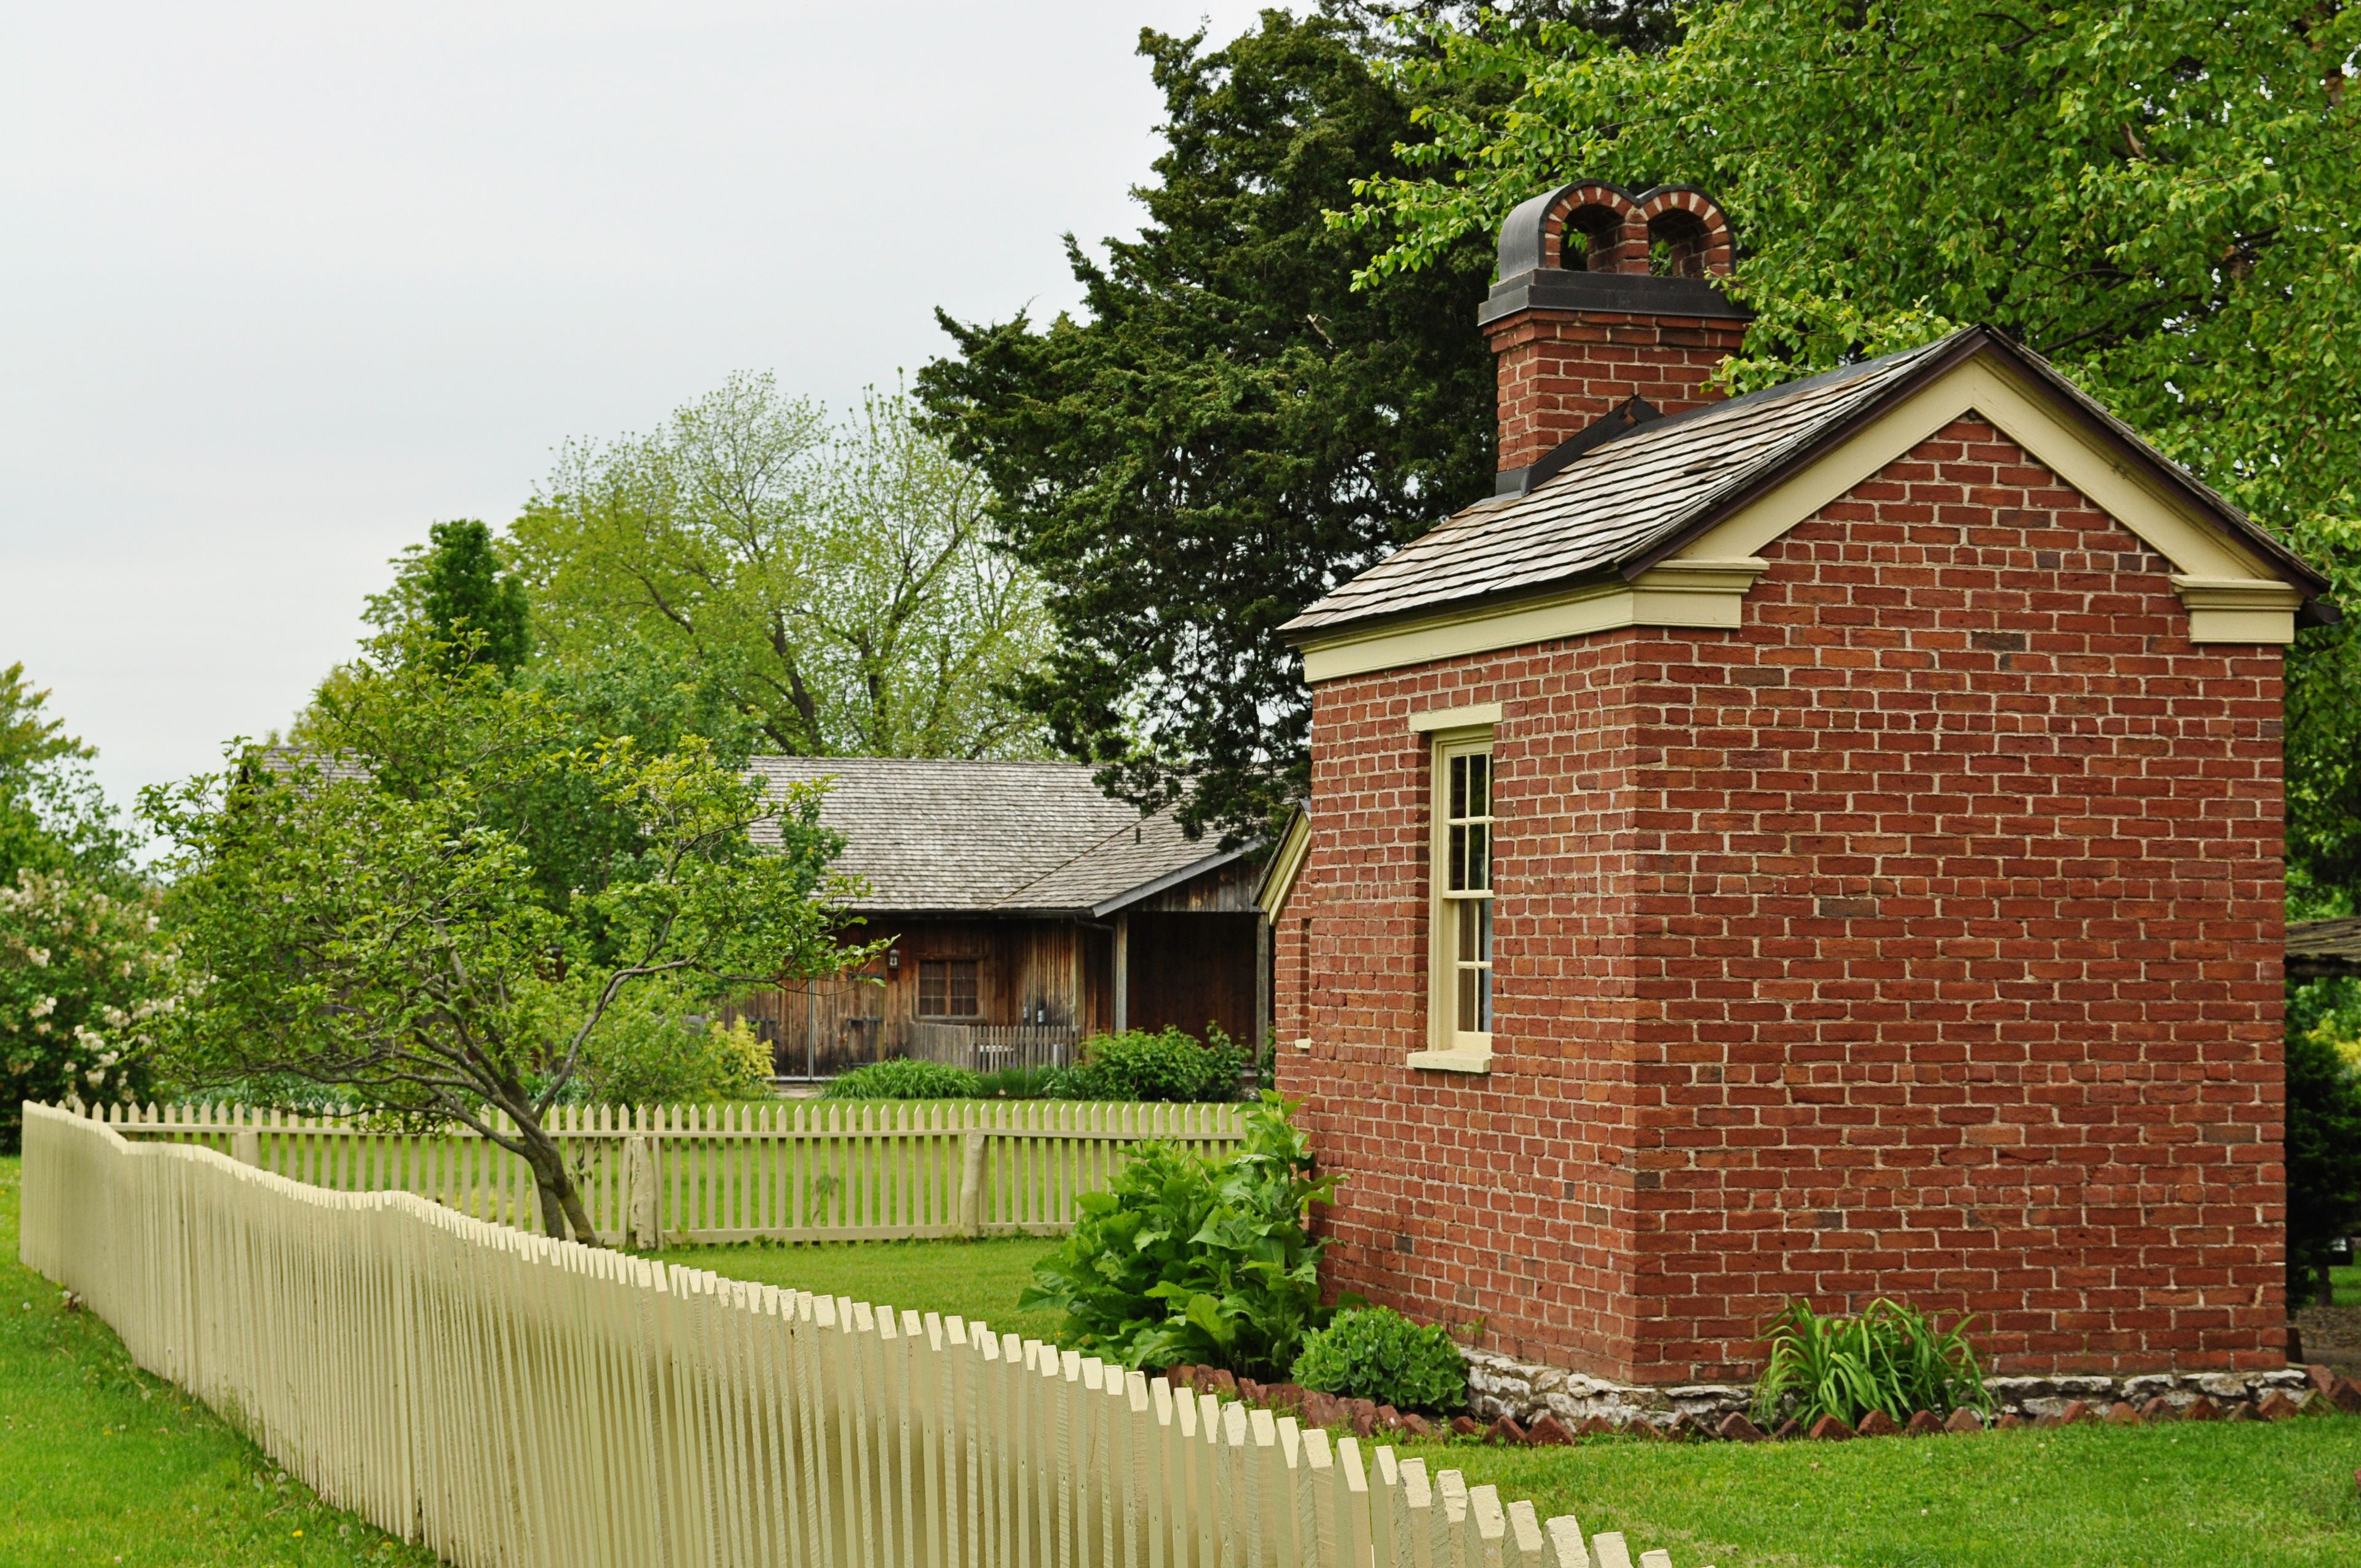 A white picket fence surrounds a red-brick building in Nauvoo.